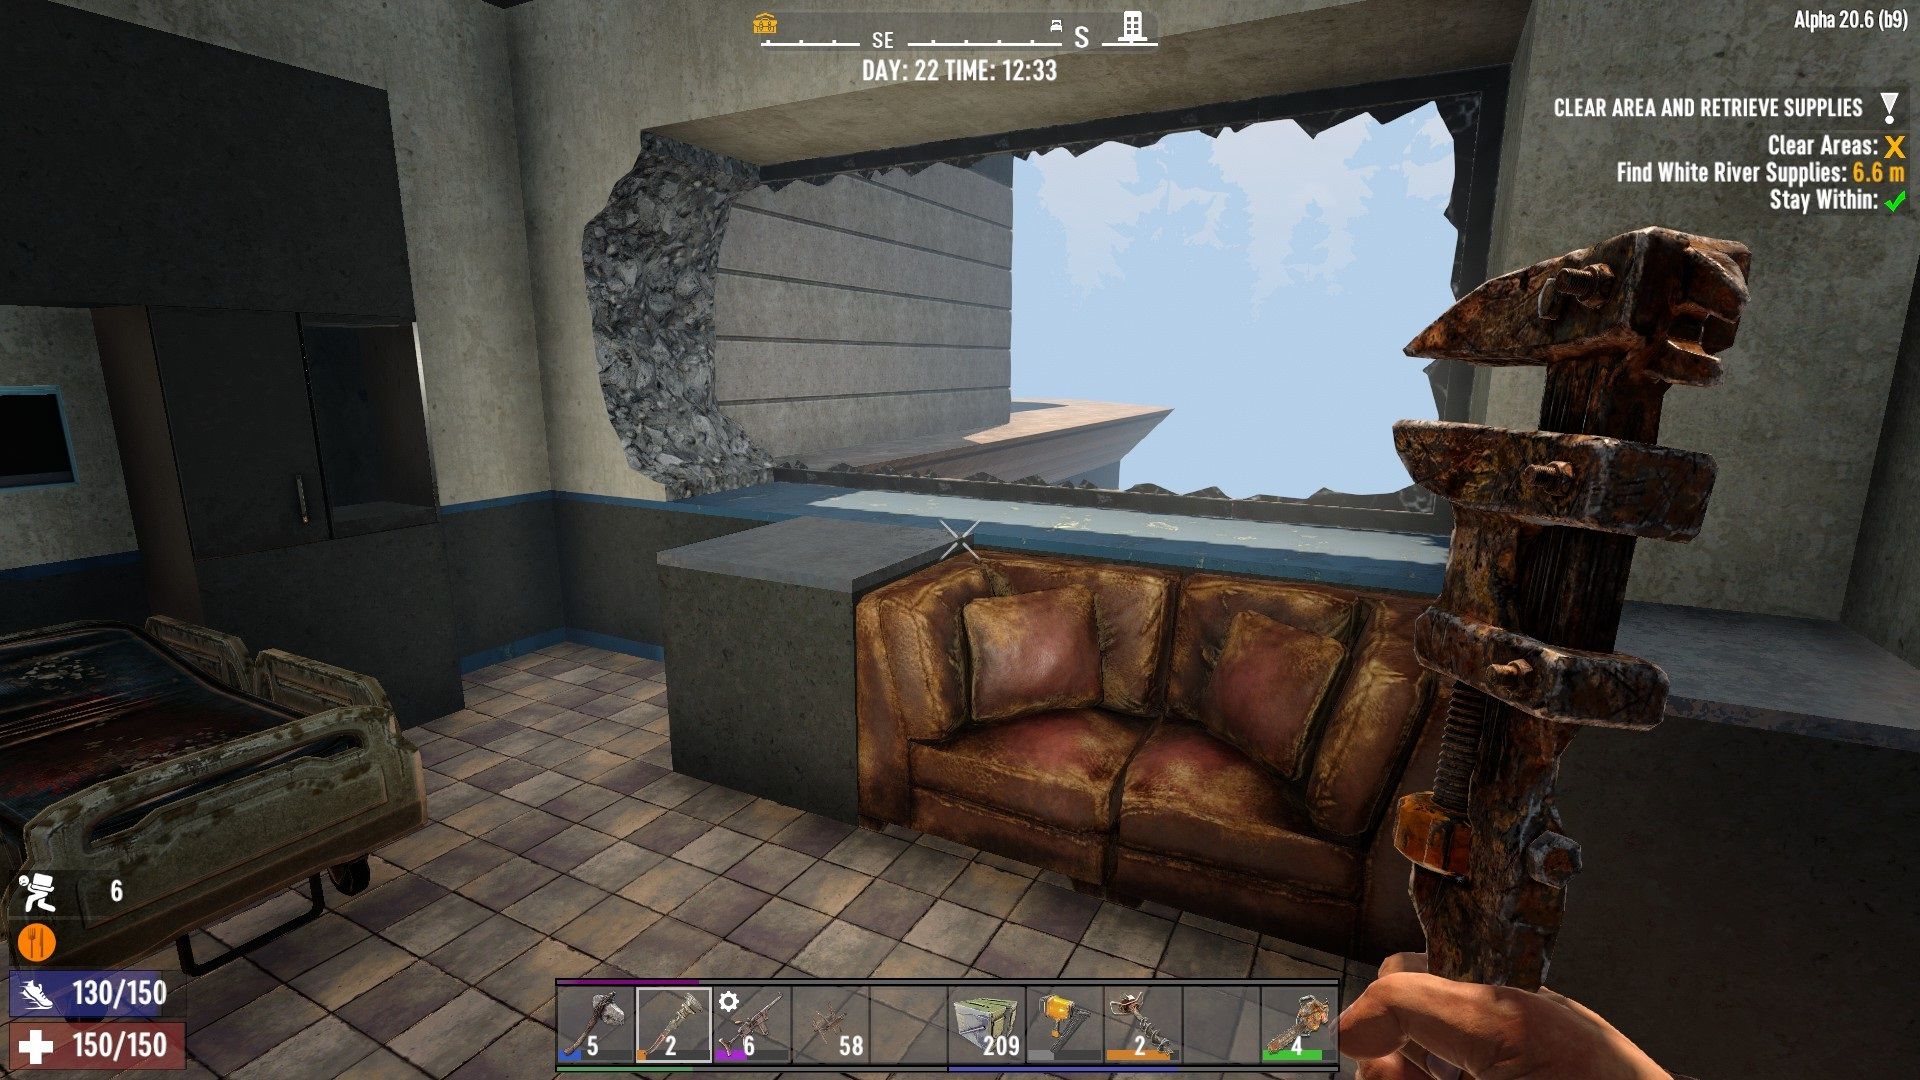 broken window to a ledge outside of the building Pop N Pills 7 Days To Die.jpg